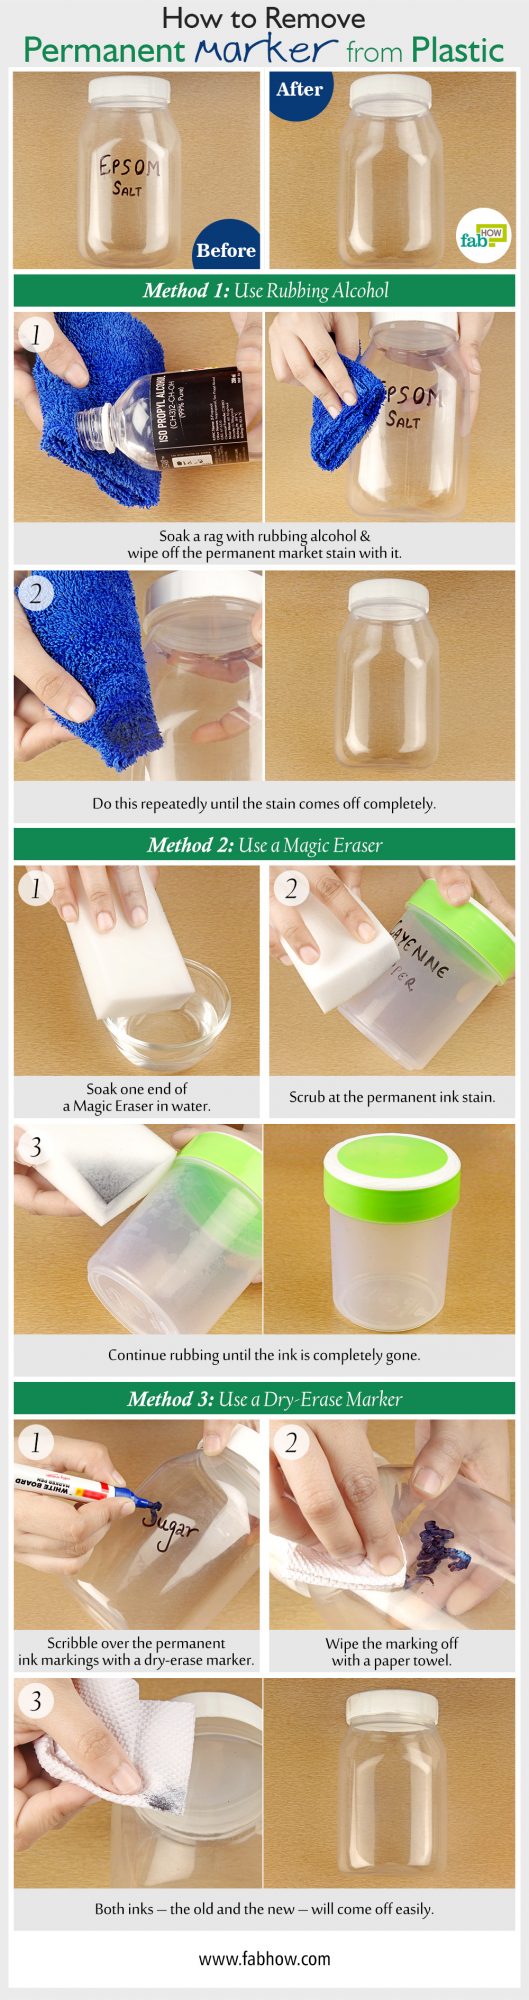 how to remove permanent marker from plastic